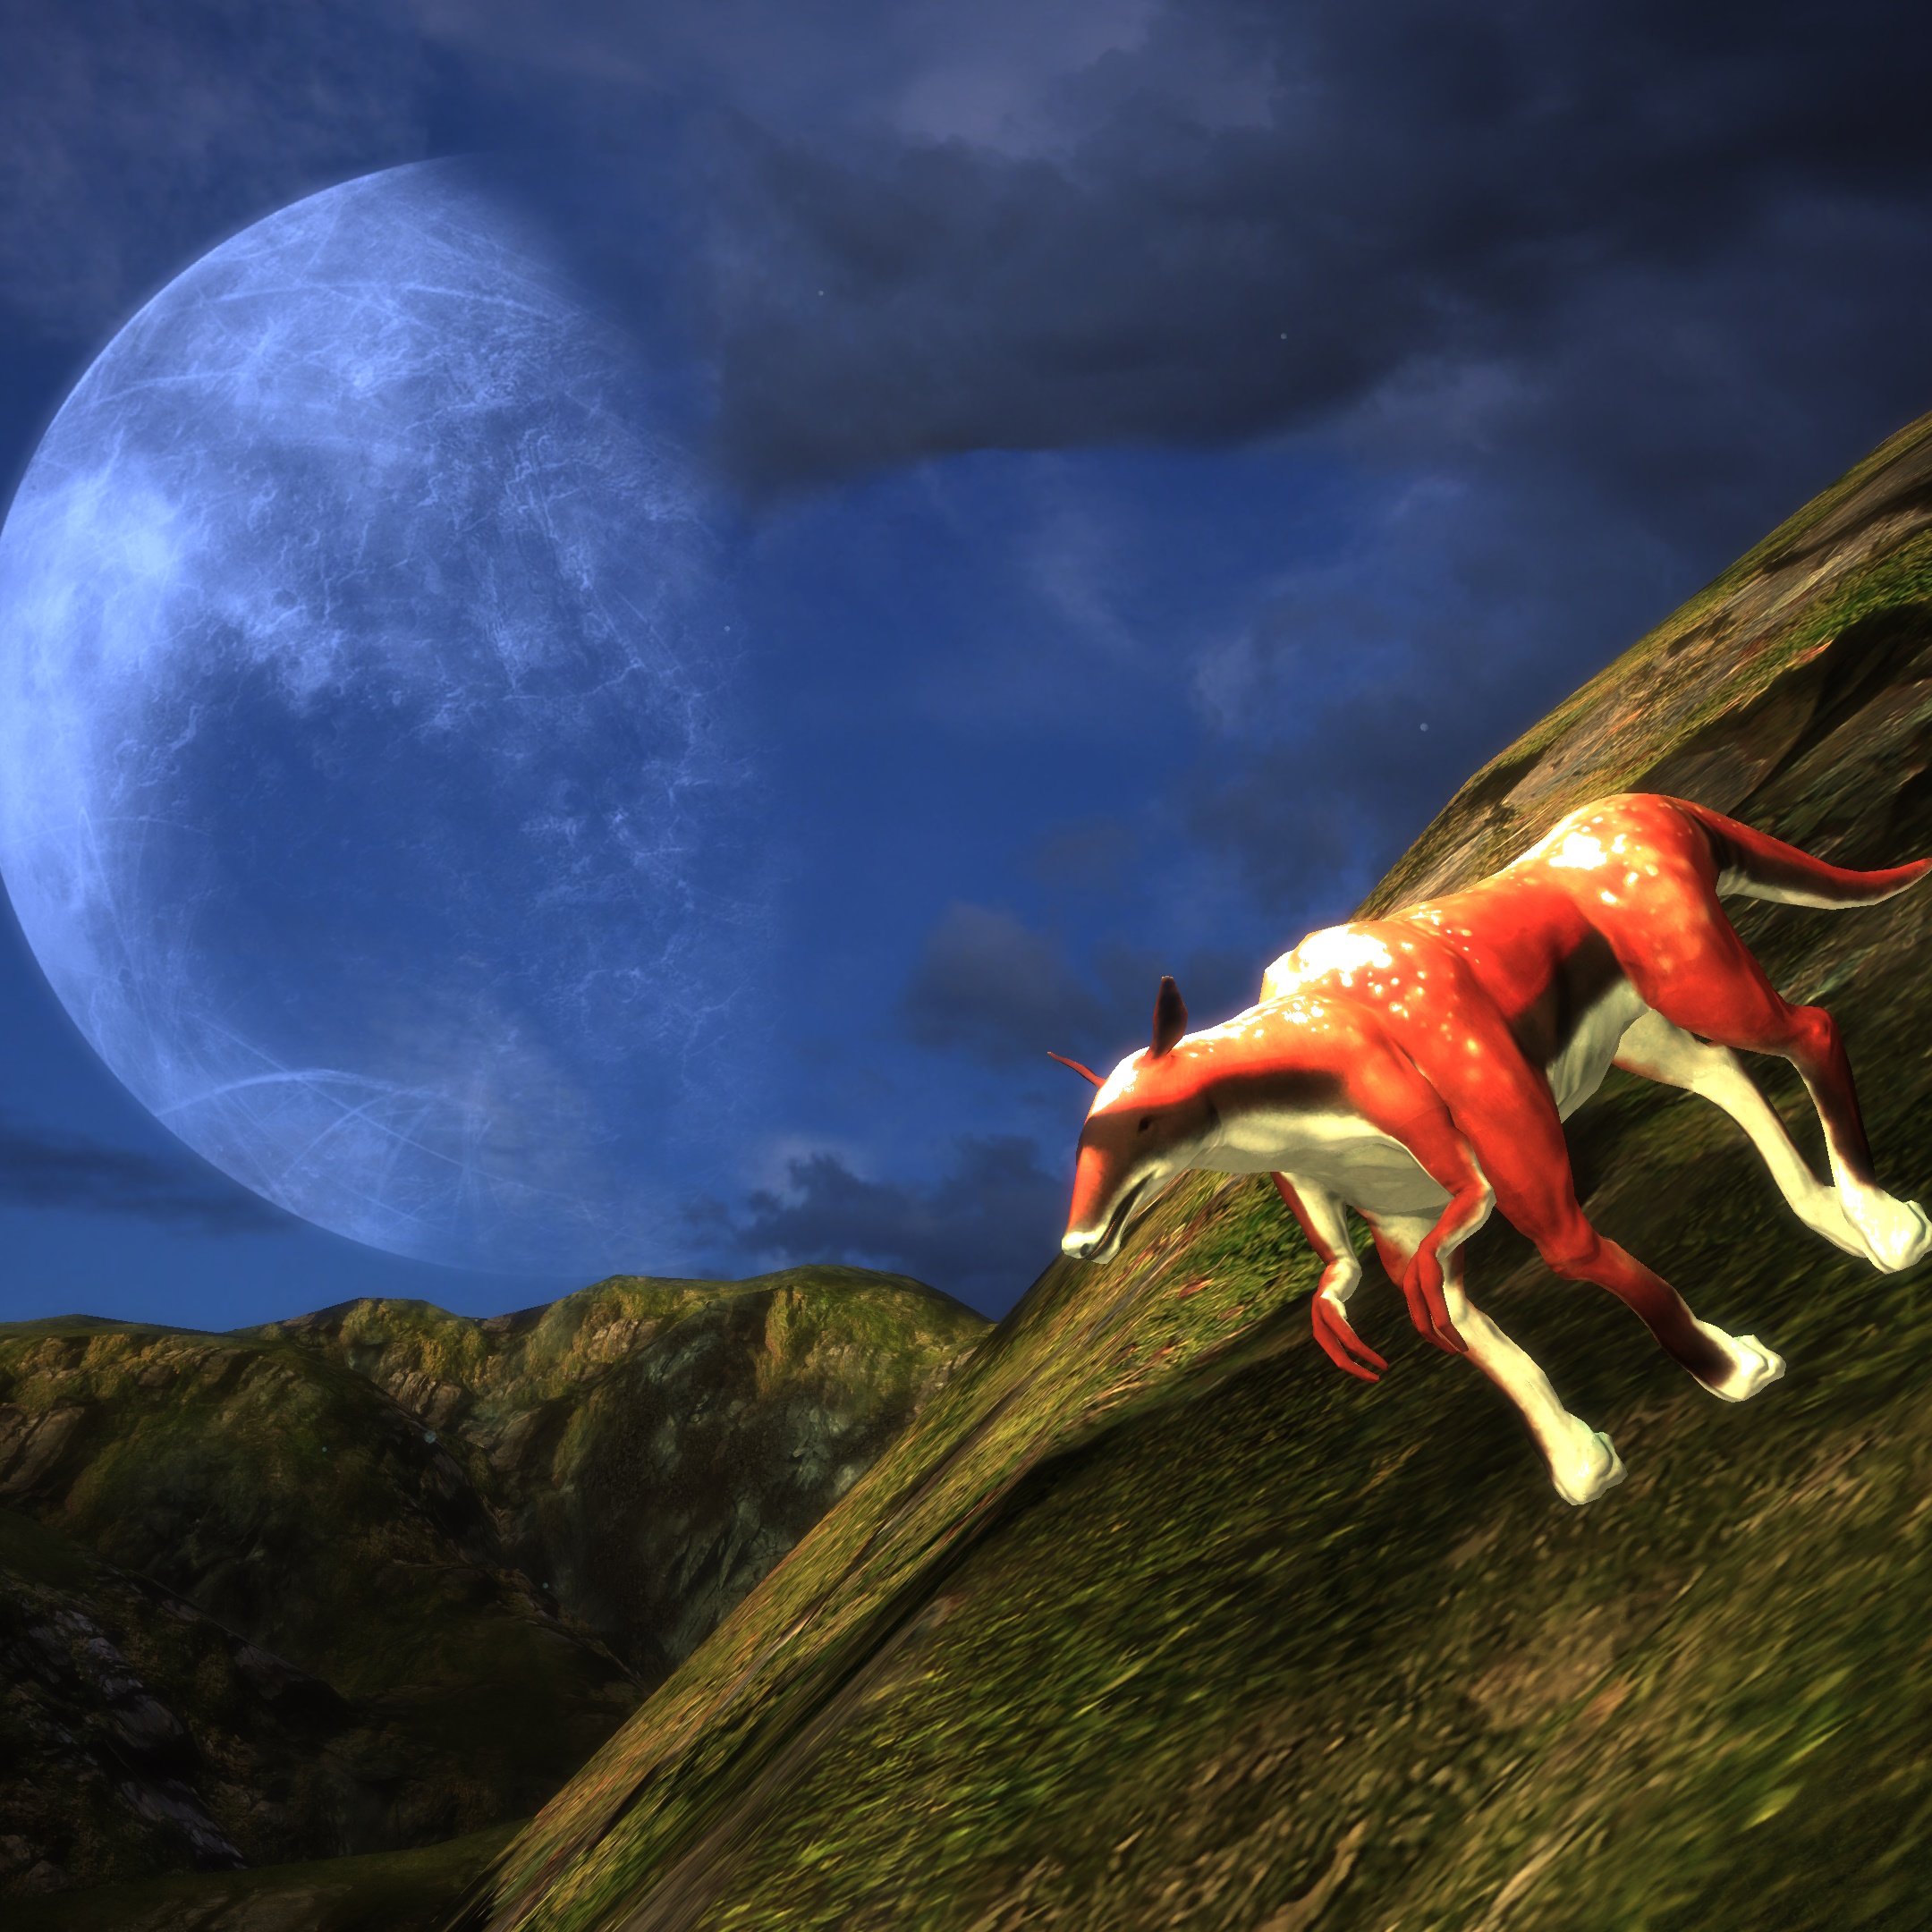 A screenshot from Mass Effect 1 shows the shiftiest space cow you ever did see on a green hill with a moon silhouetted in the sky. It will steal your credits with its long orange tentacle-like hands.